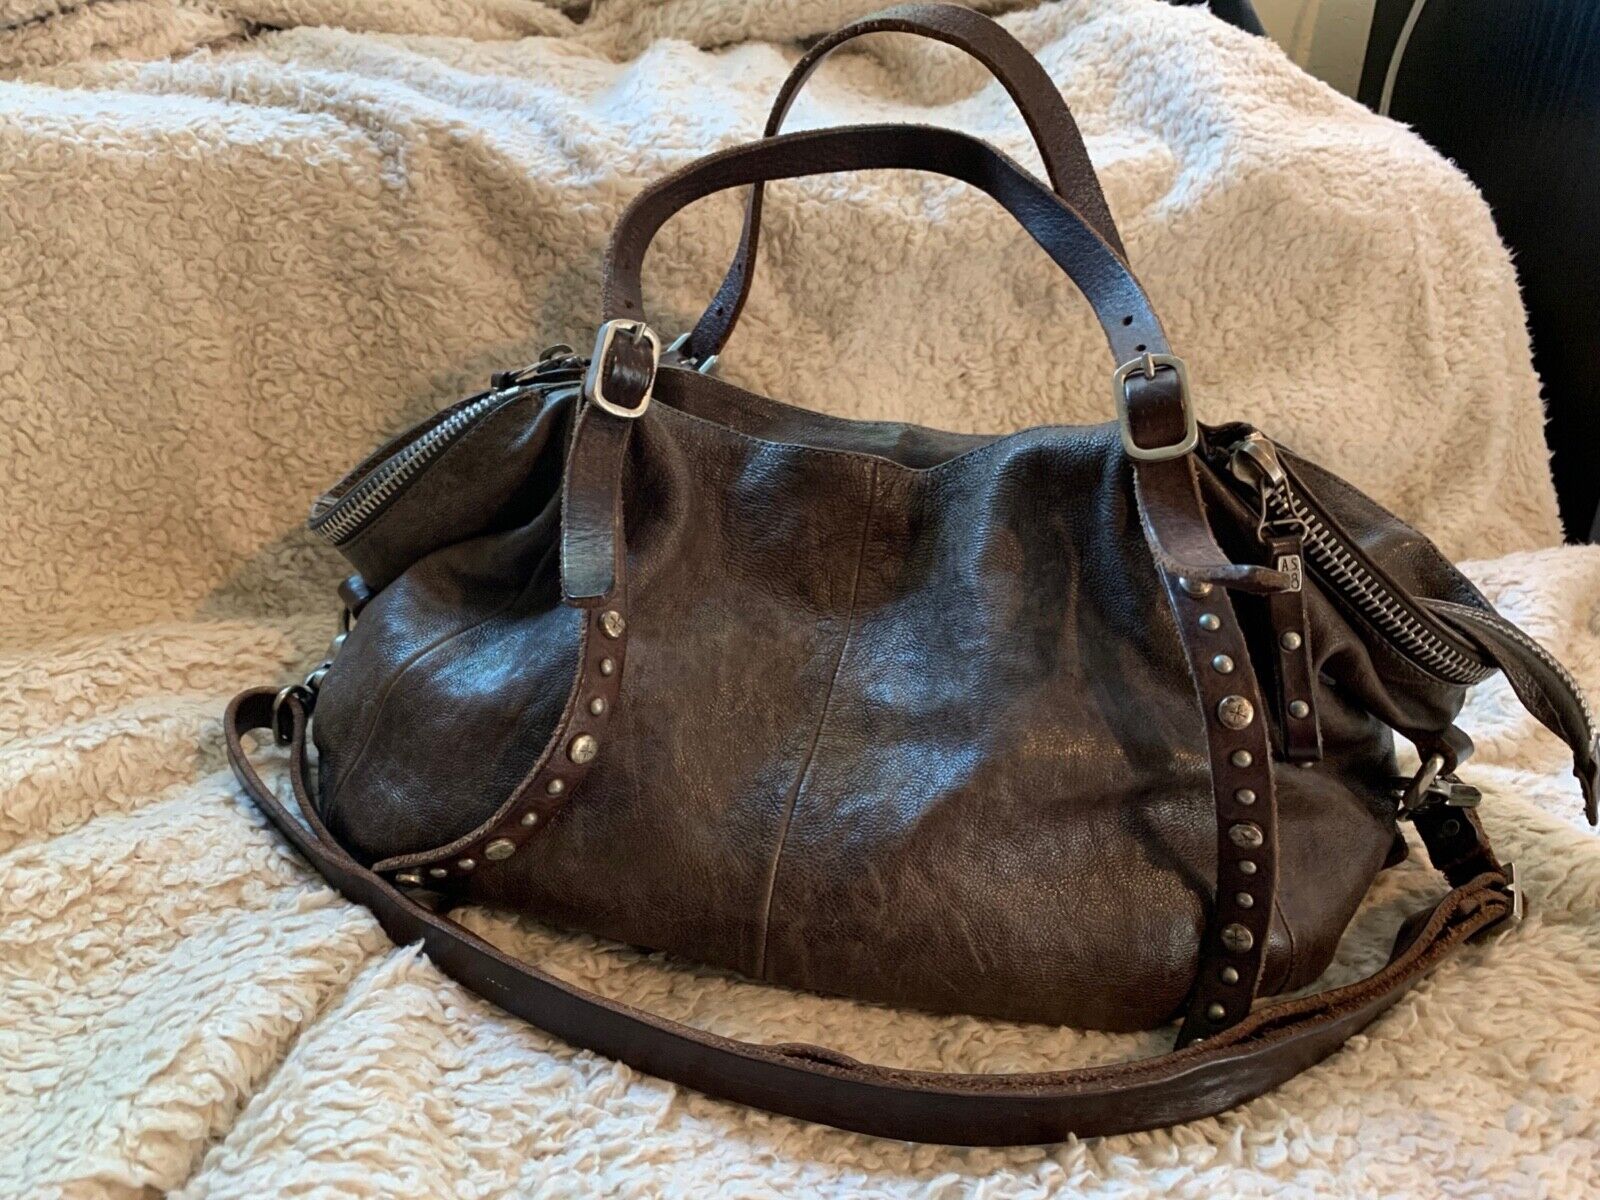 A.S. 98 bag MODEL: ROCKSTAR, large, great condition: Dusty/Aged Dark Brown